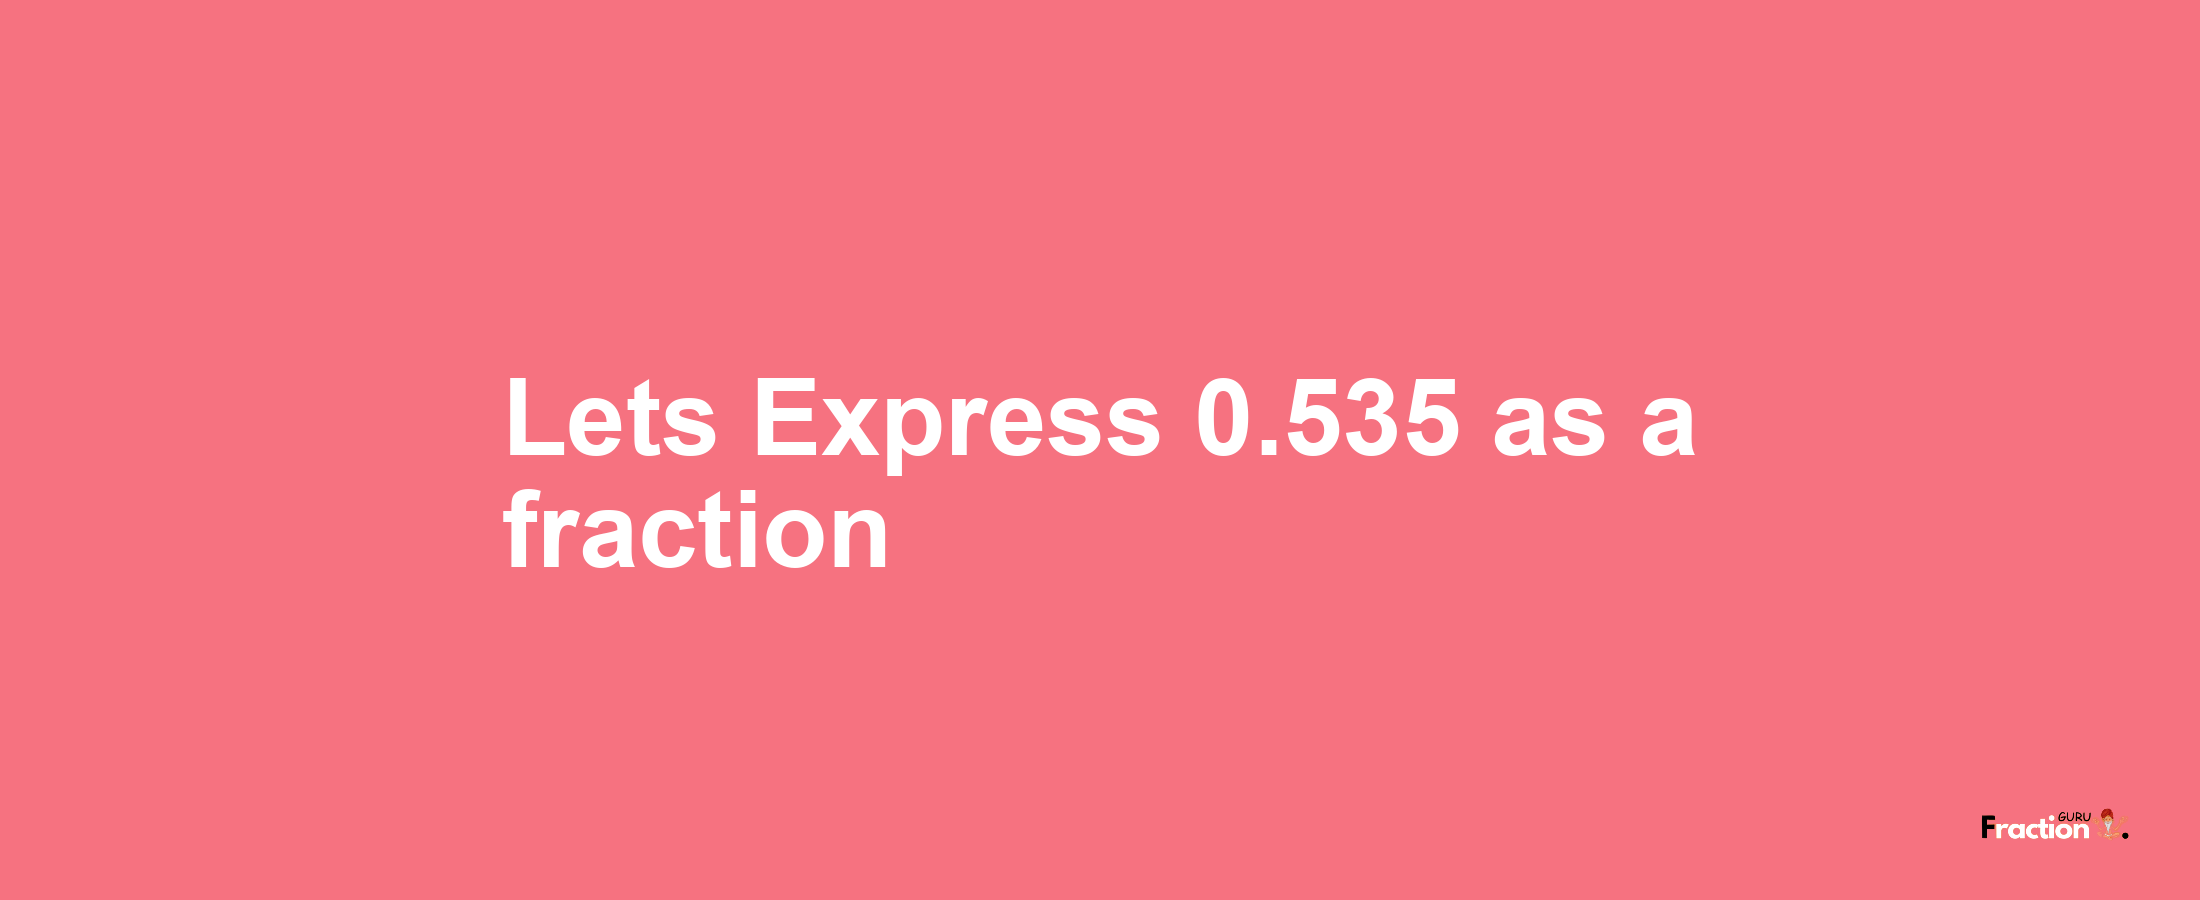 Lets Express 0.535 as afraction